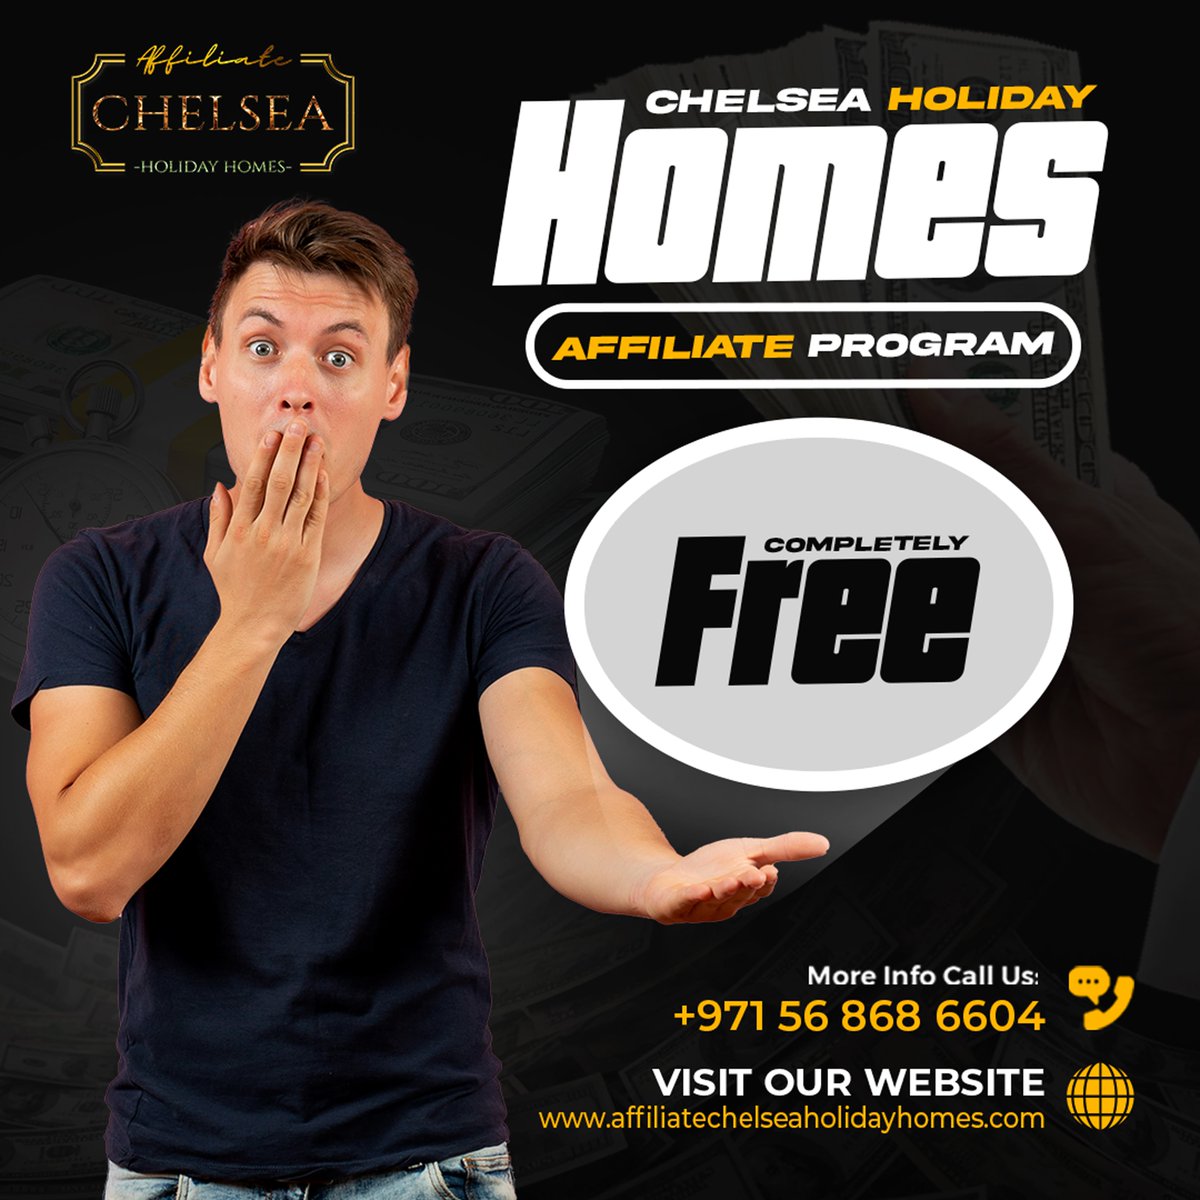 Exciting news! Take advantage of our free Chelsea Holiday Homes Affiliate program to enhance your revenue streams. It’s completely free to join!

-Contact us at +971 56 868 6604

-Visit: affiliatechelseaholidayhomes.com

#AffiliateMarketing #BusinessOpportunity #ChelseaHolidayHomes